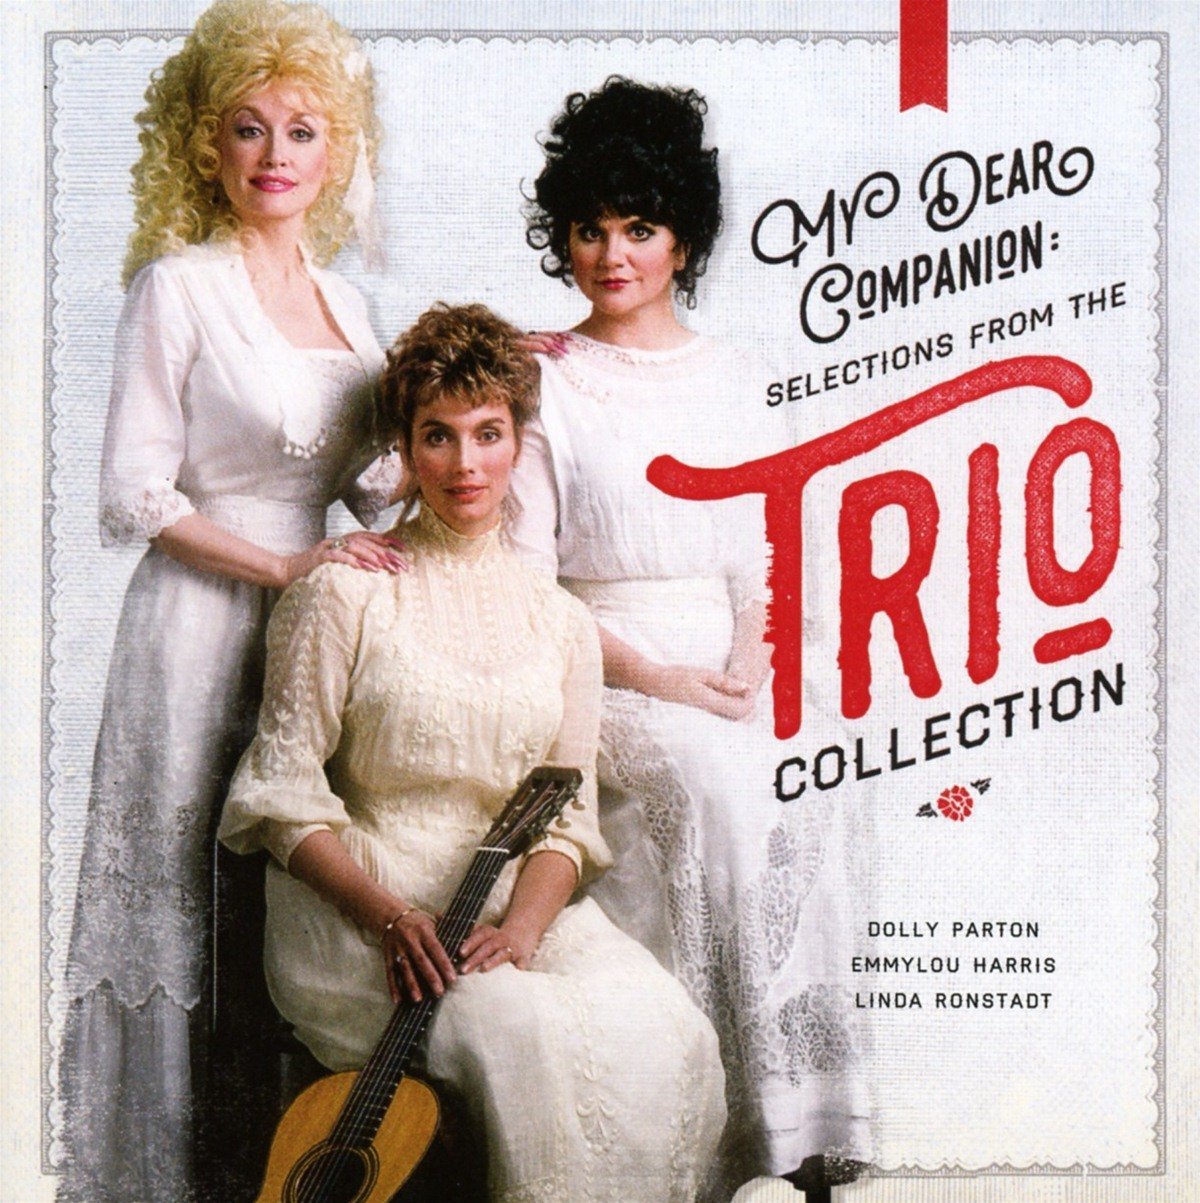 MY DEAR COMPANION: SELECTIONS FROM THE TRIO COLLECTION